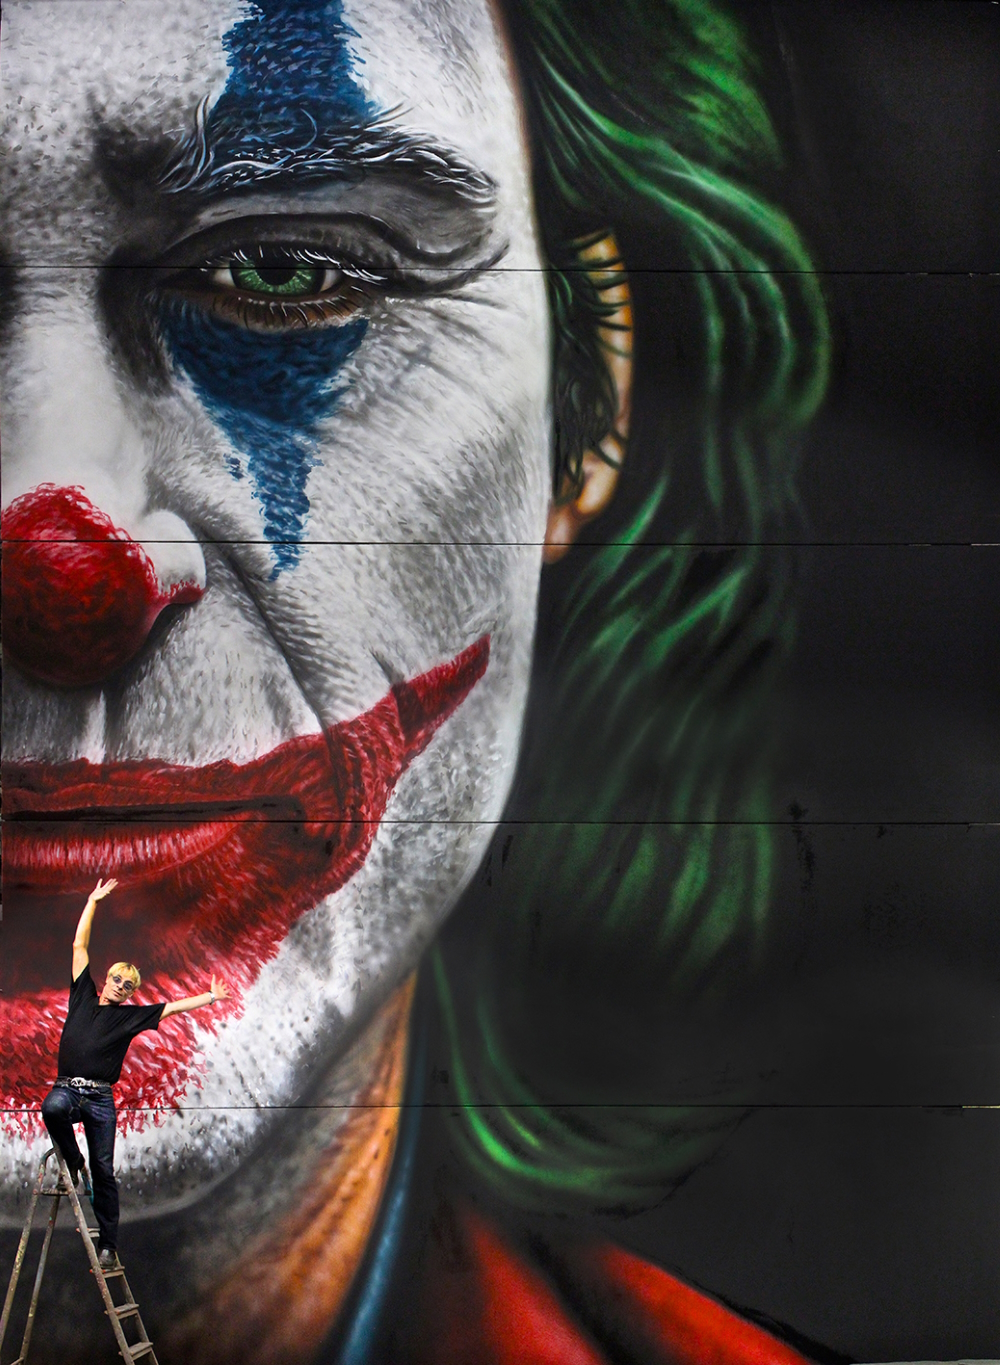 'Joker' (billboard size: 900x674cm @ Kino International respectively 600x900cm @ Delphi Filmpalast): huge supervillain's famous face, small painter on the ladder in front of his billboard for the 2019 psychological thriller film that stars Joaquin Phoenix. 